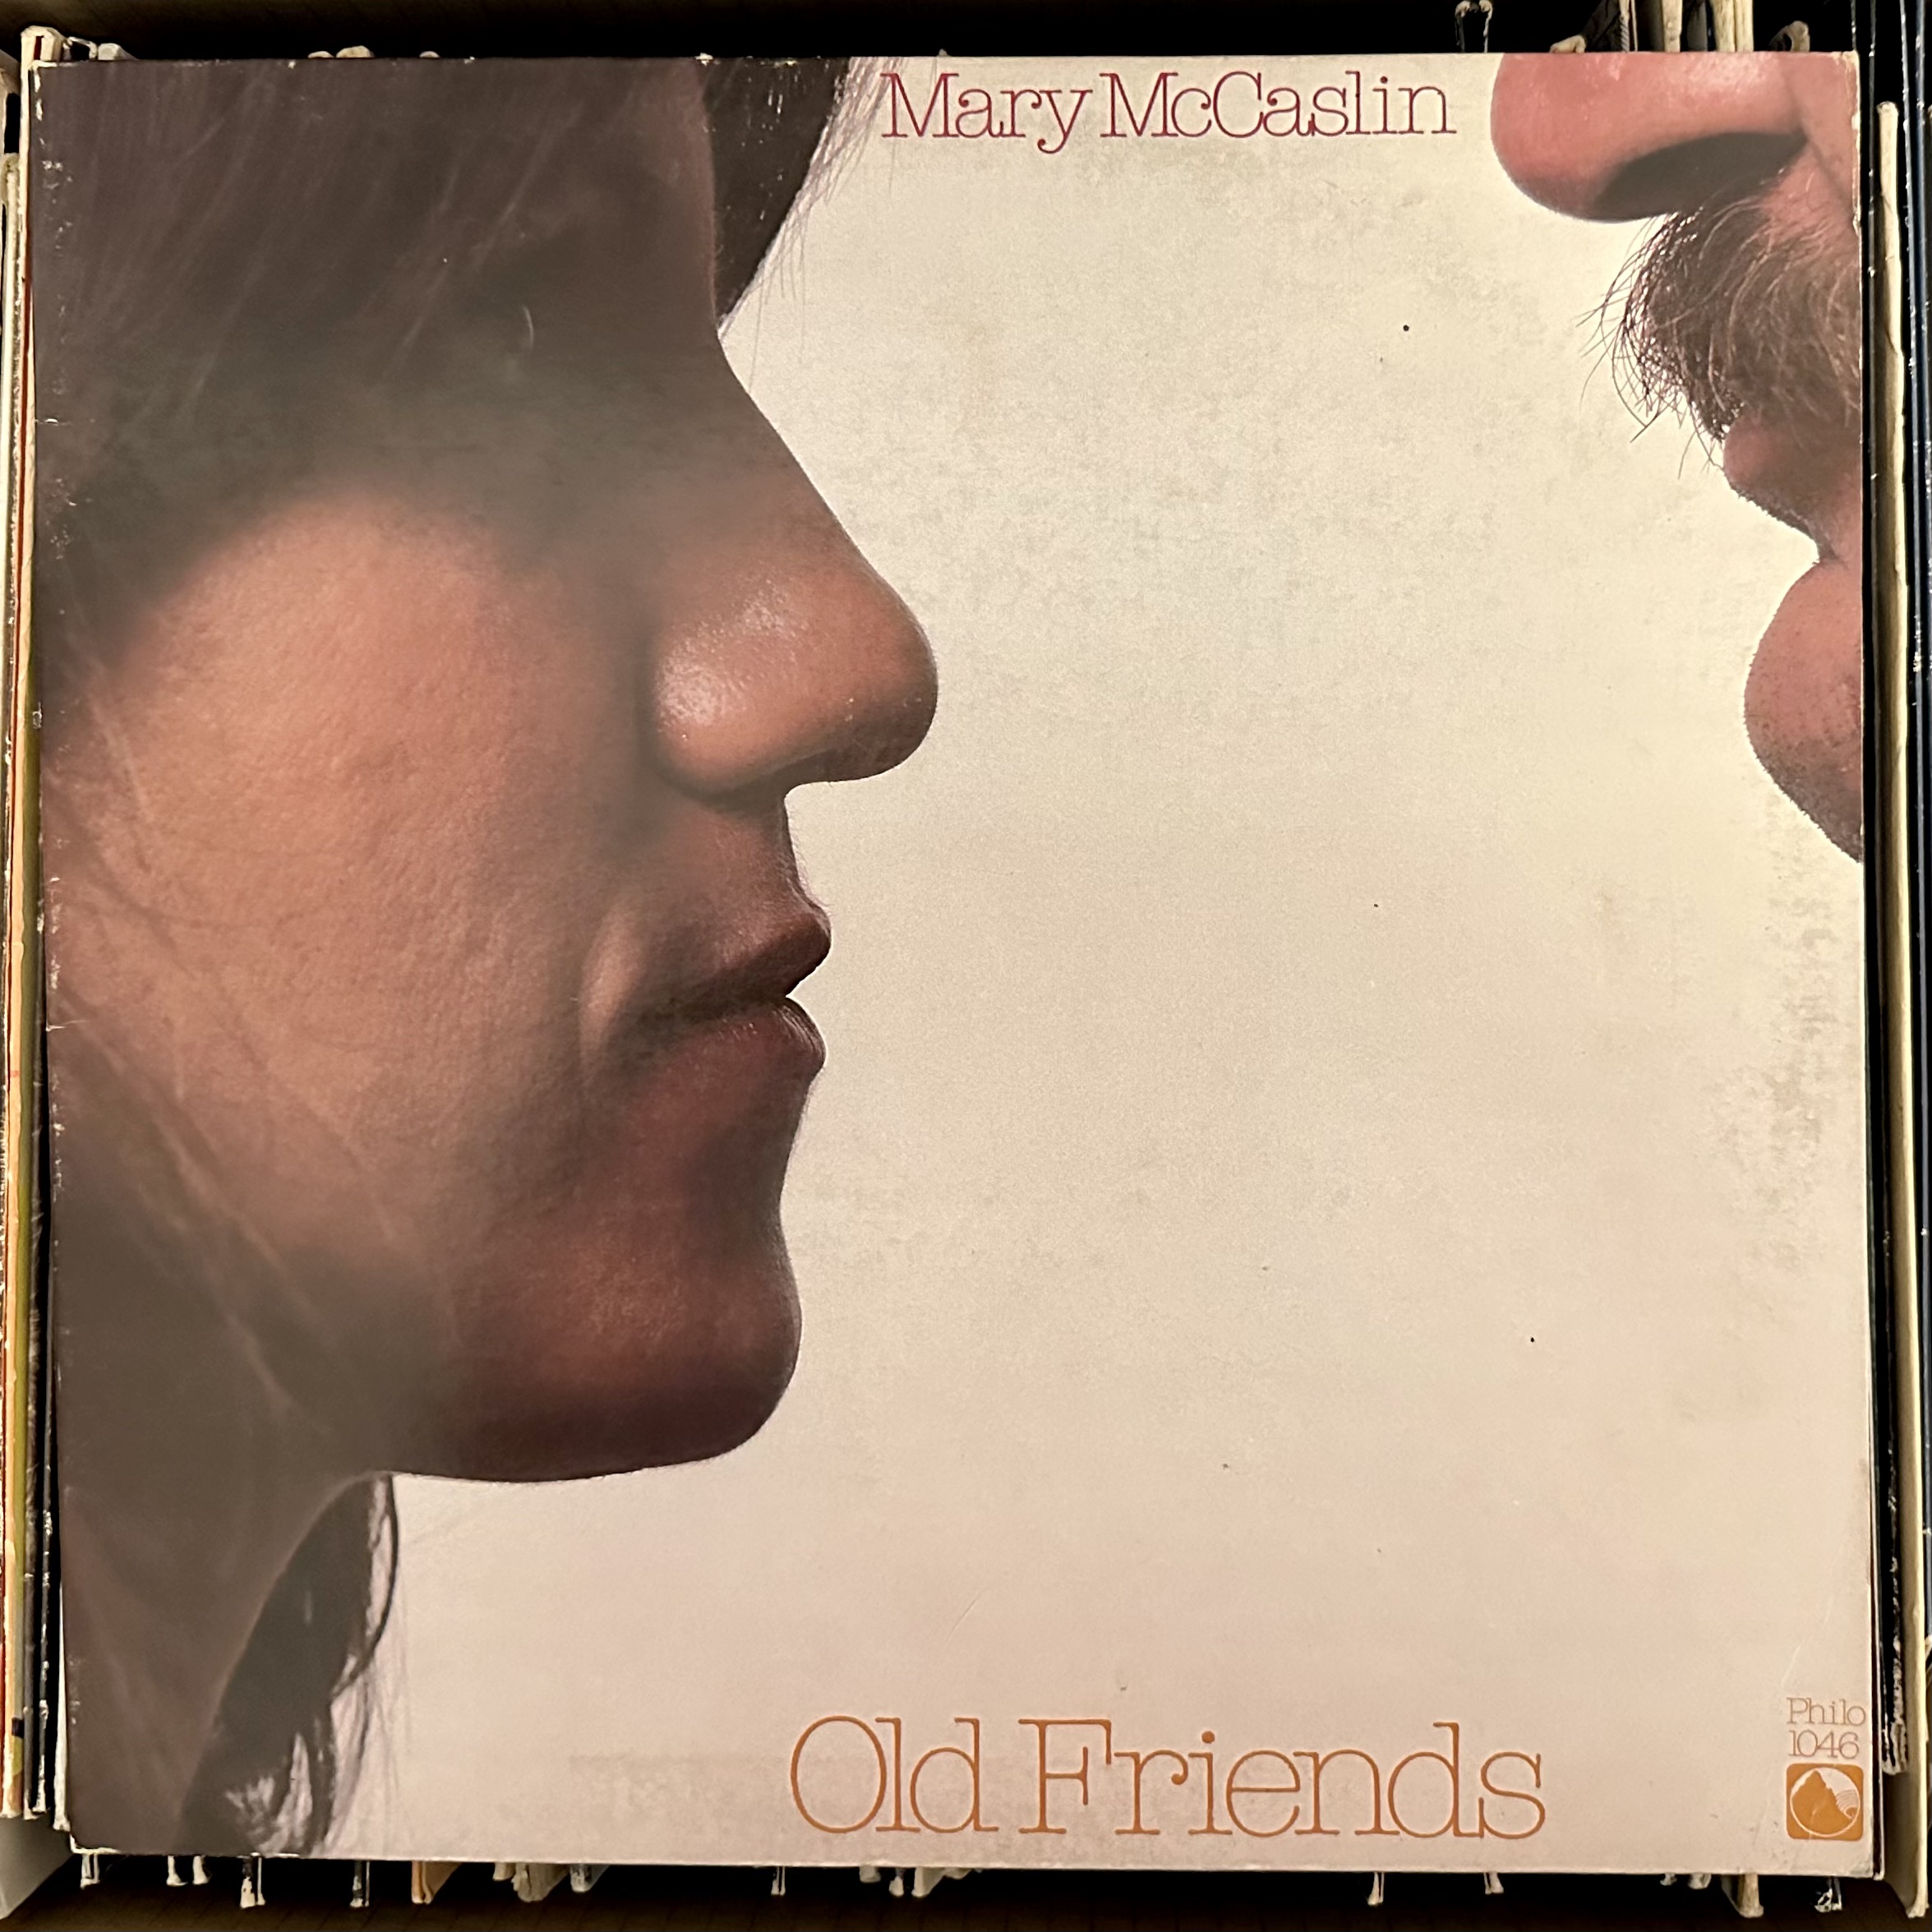 Old Friends by Mary McCaslin